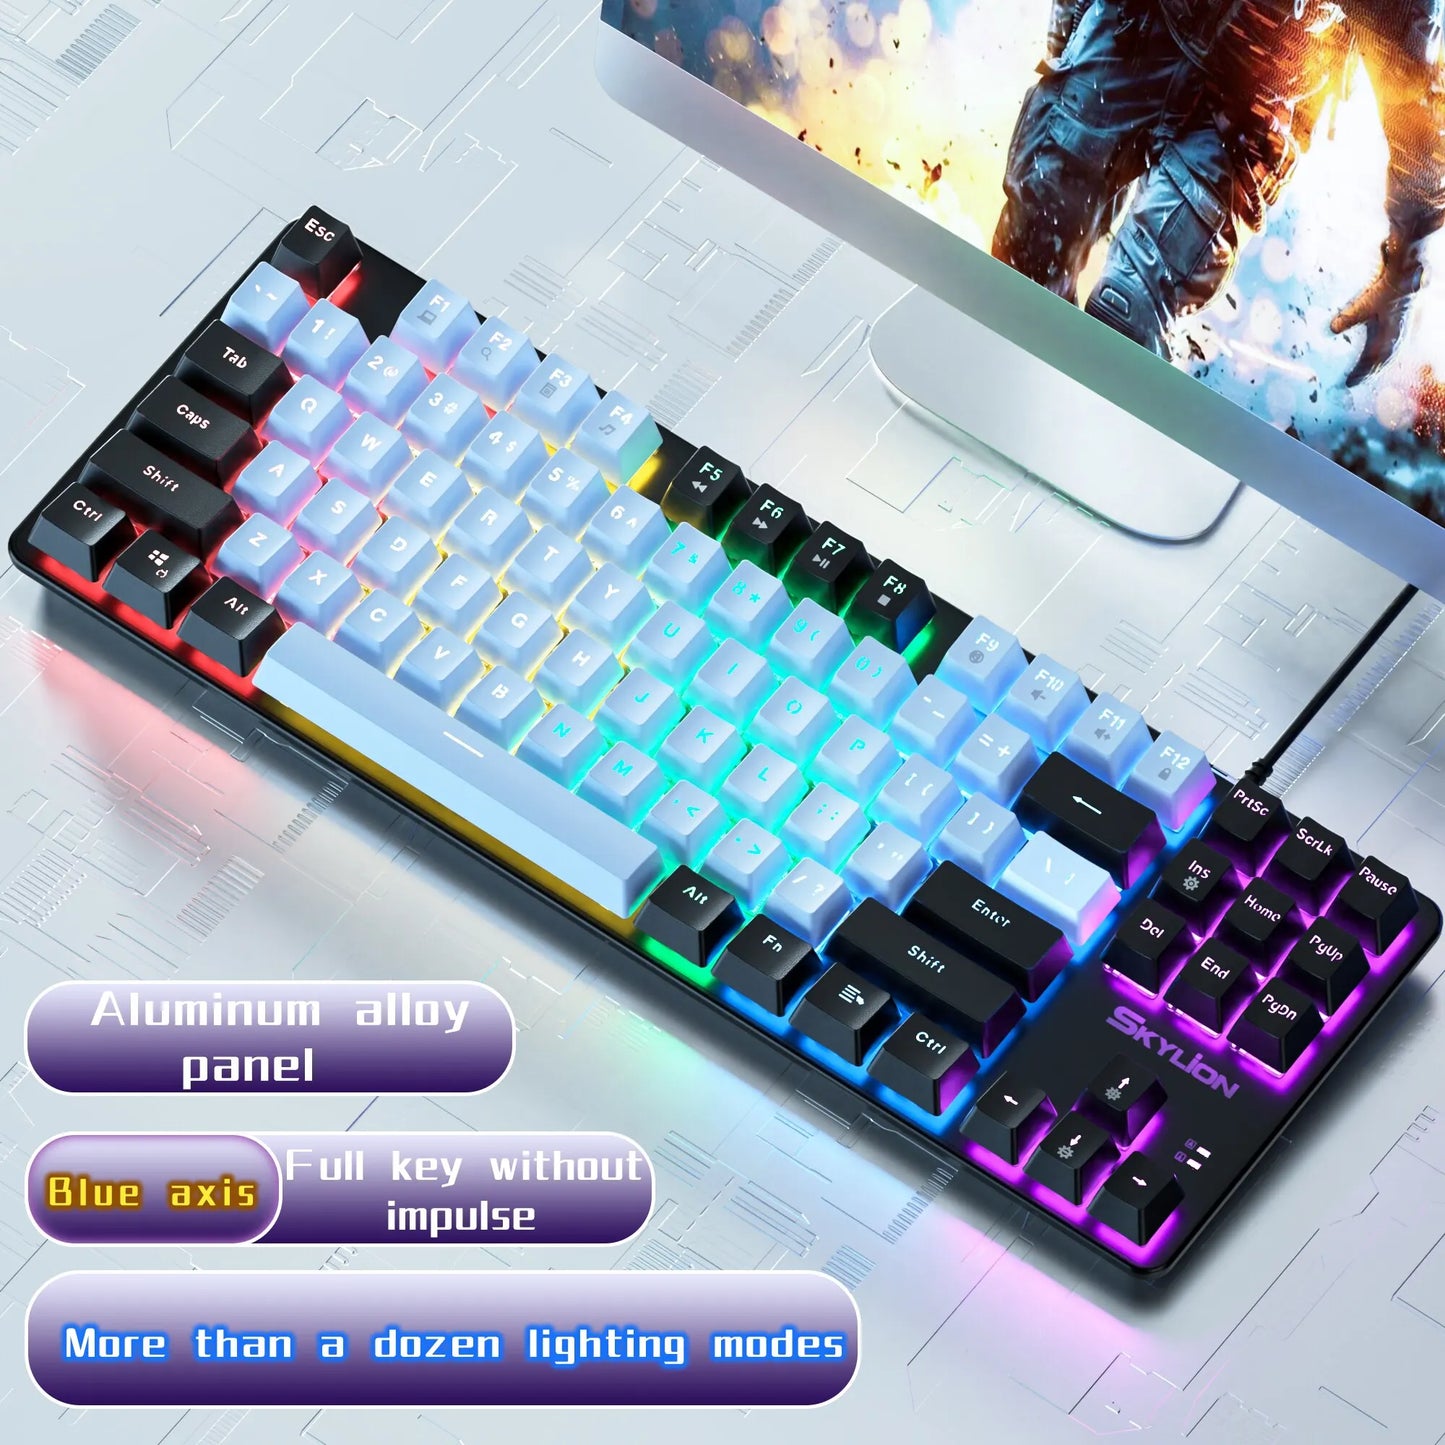 SKYLION H87 Wired Mechanical Keyboard 10 Kinds of Colorful Lighting